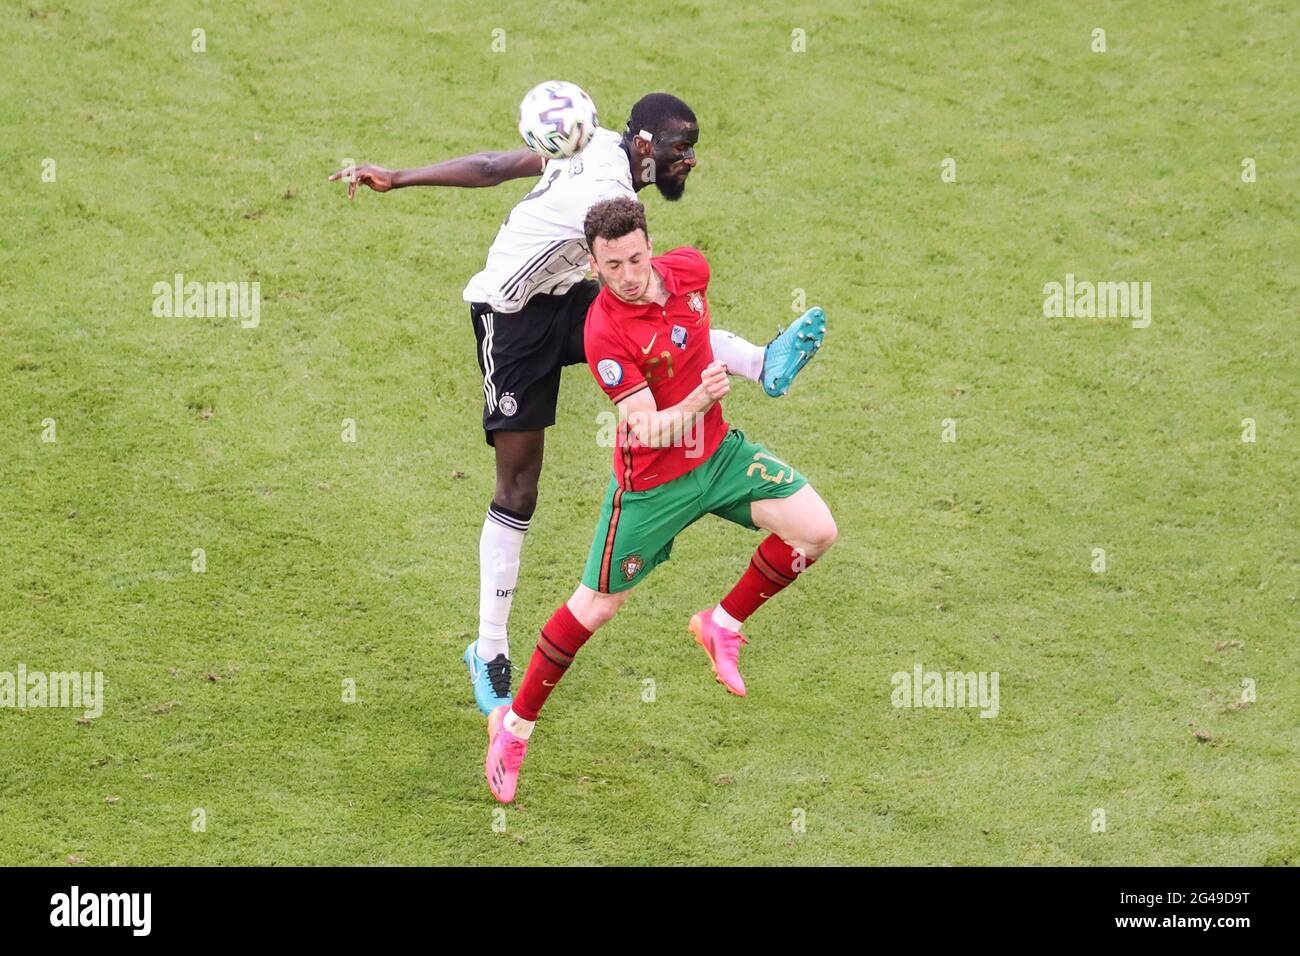 Munich, Germany. 19th June, 2021. Antonio Ruediger (up) of Germany vies with Diogo Jota of Portugal during the UEFA Euro 2020 Championship Group F match in Munich, Germany, June 19, 2021. Credit: Shan Yuqi/Xinhua/Alamy Live News Stock Photo